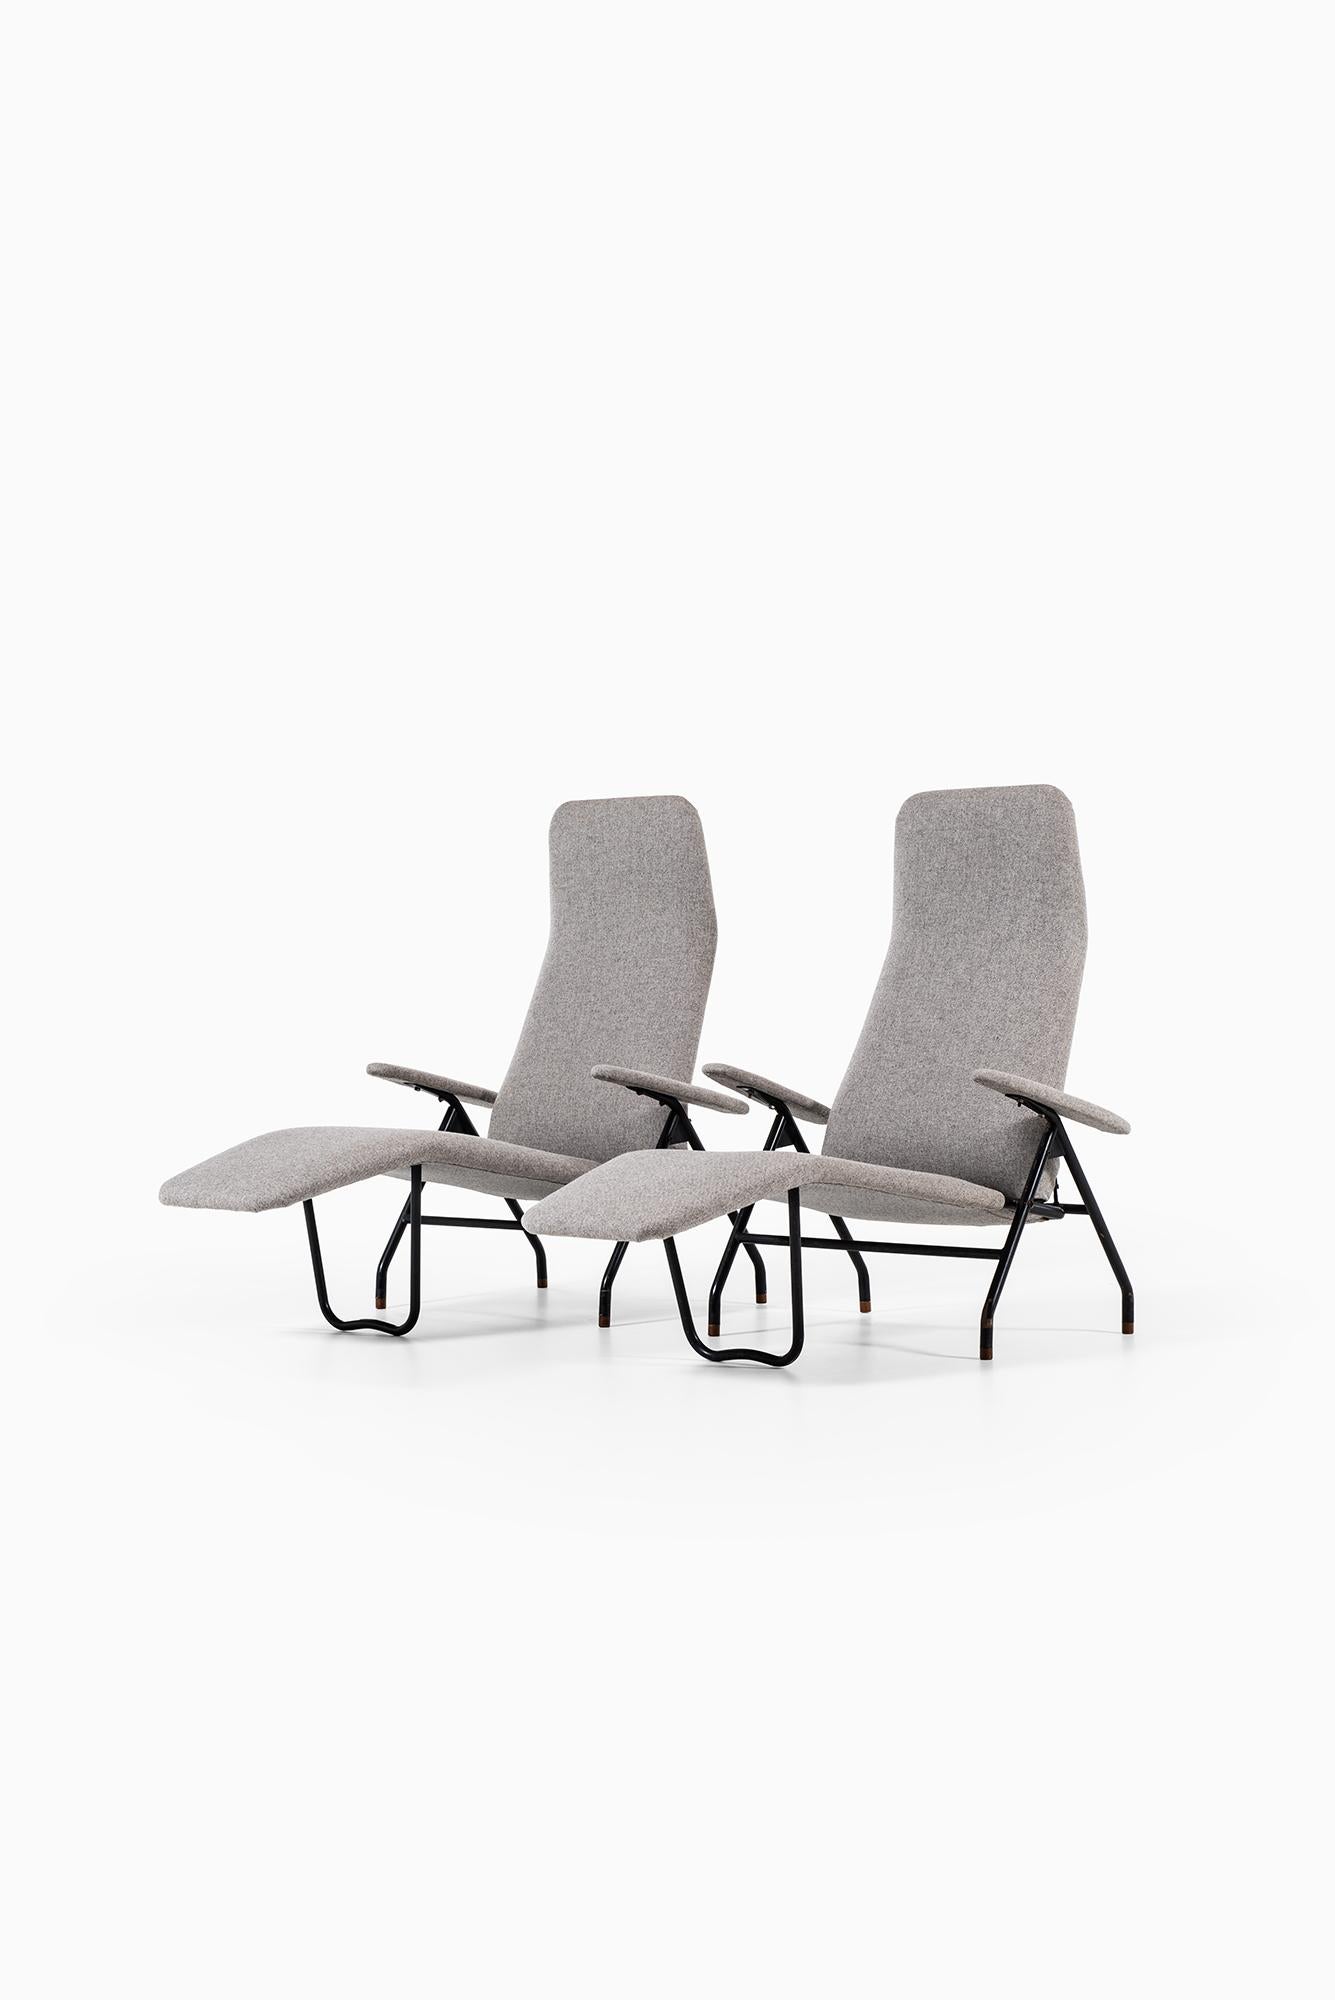 A pair of reclining easy chairs. Produced in Denmark. Black lacquered steel and newly reupholstered in grey fabric.